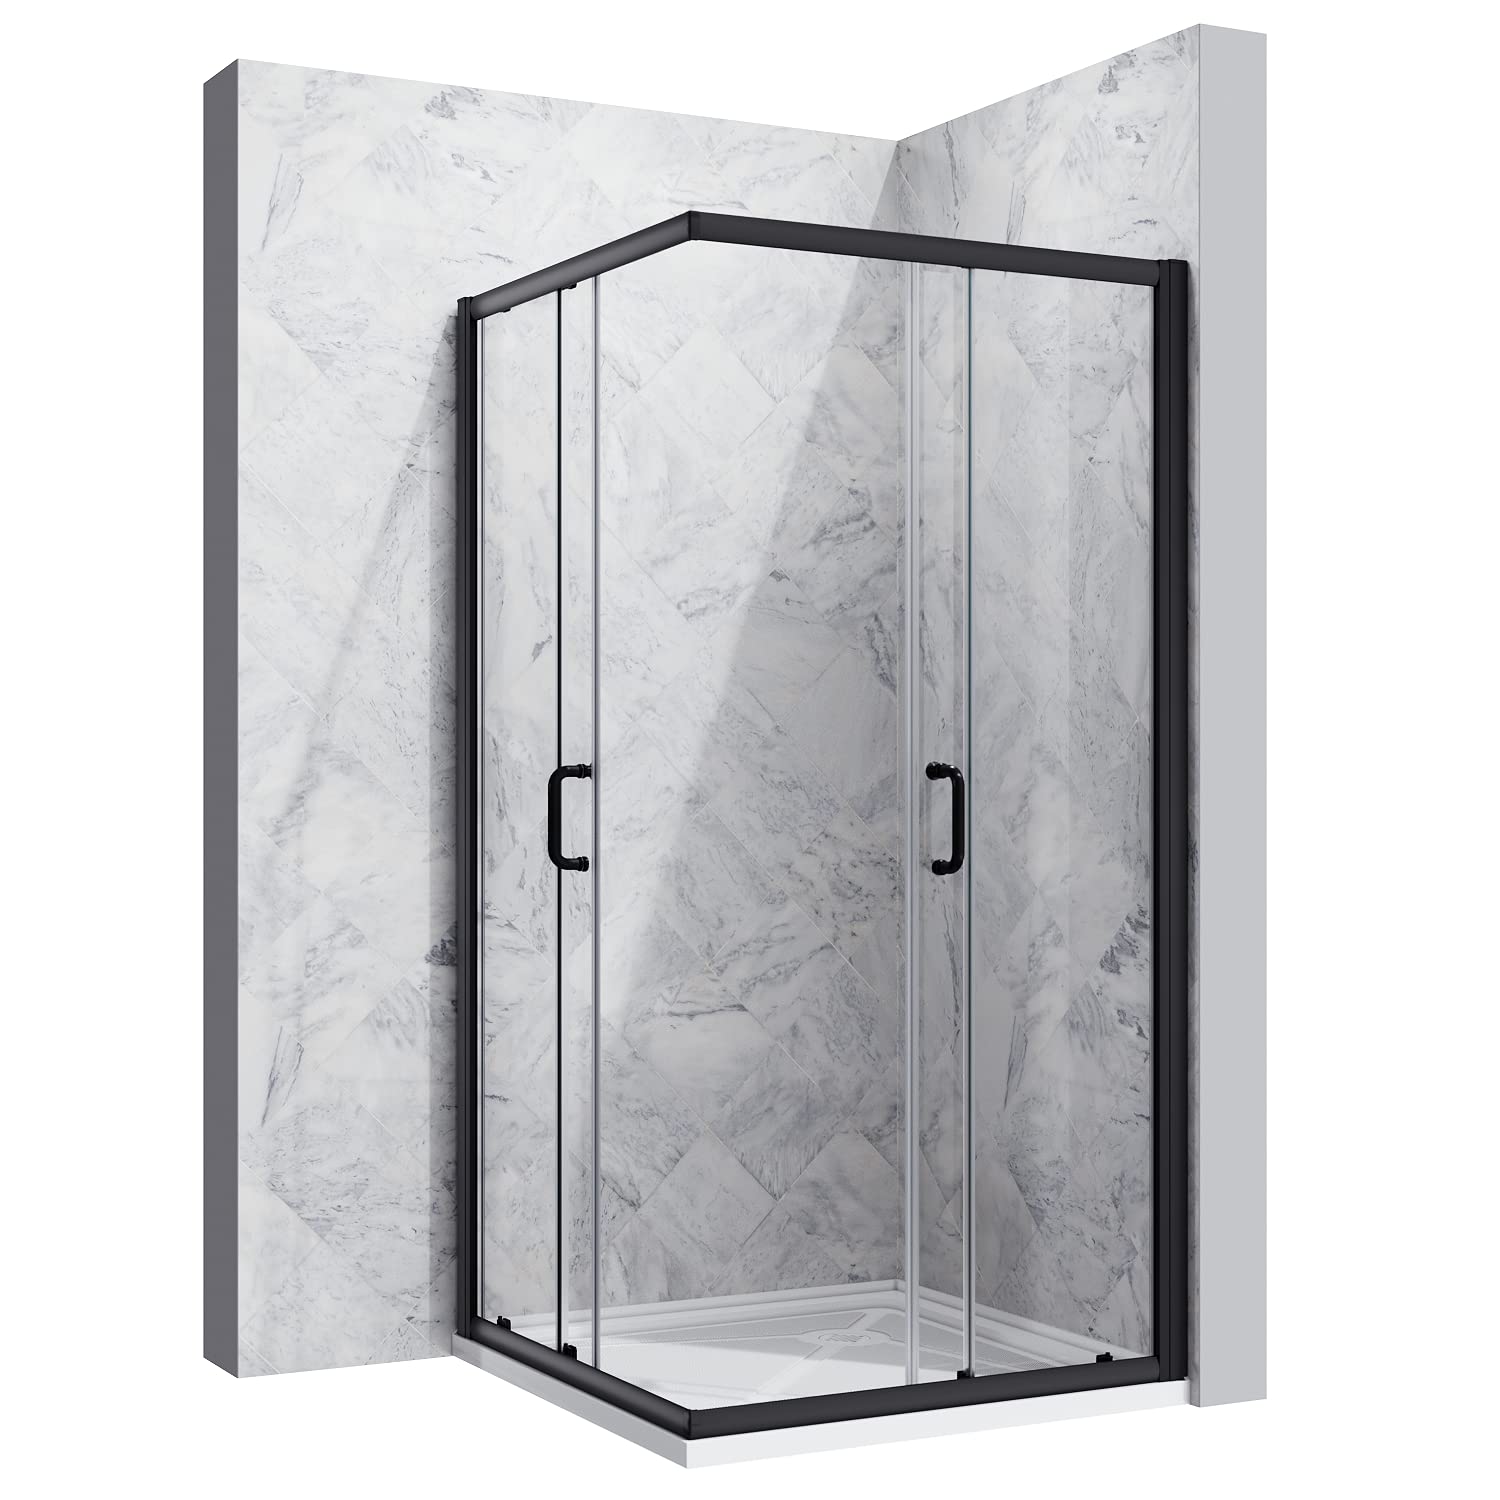 SUNNY SHOWER 36 in. W x 36 in. D x 72 in. H Black Finish Corner Entry Enclosure With Sliding Doors And White Square Base